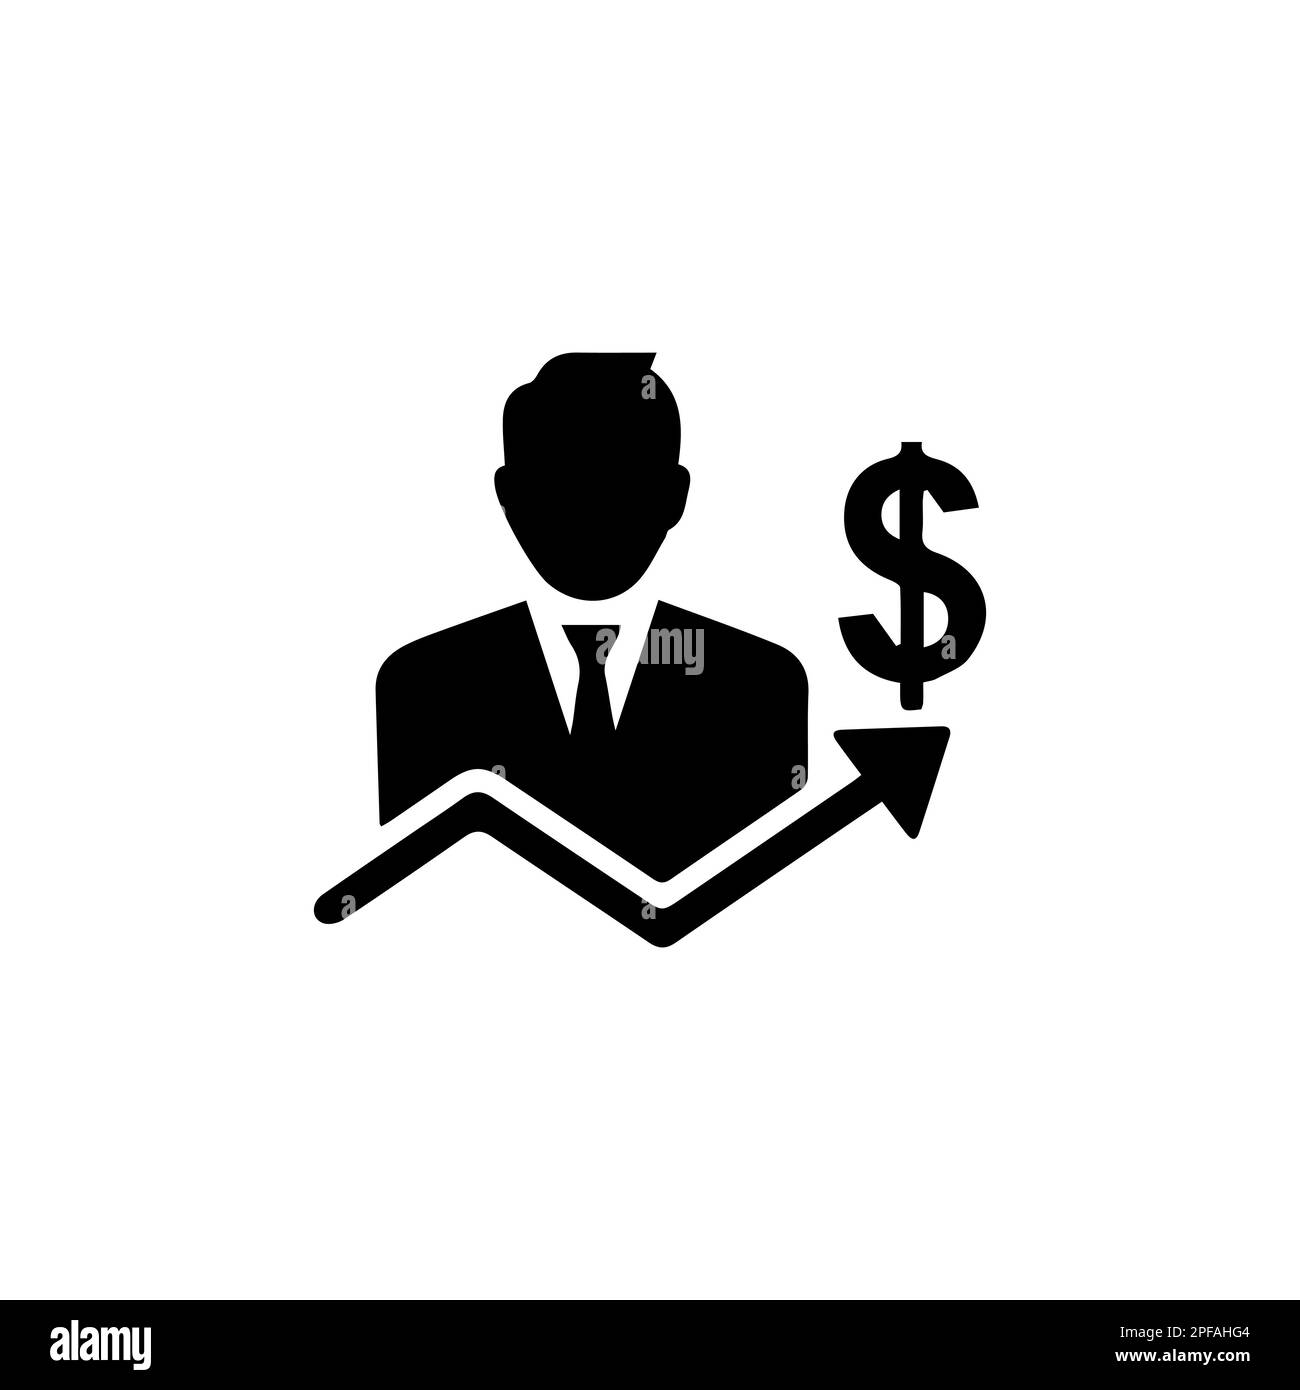 A businessman graph icon. Shareholder icon. Investment. Entrepreneur. Businessman. Vector icon isolated on white background. Stock Vector